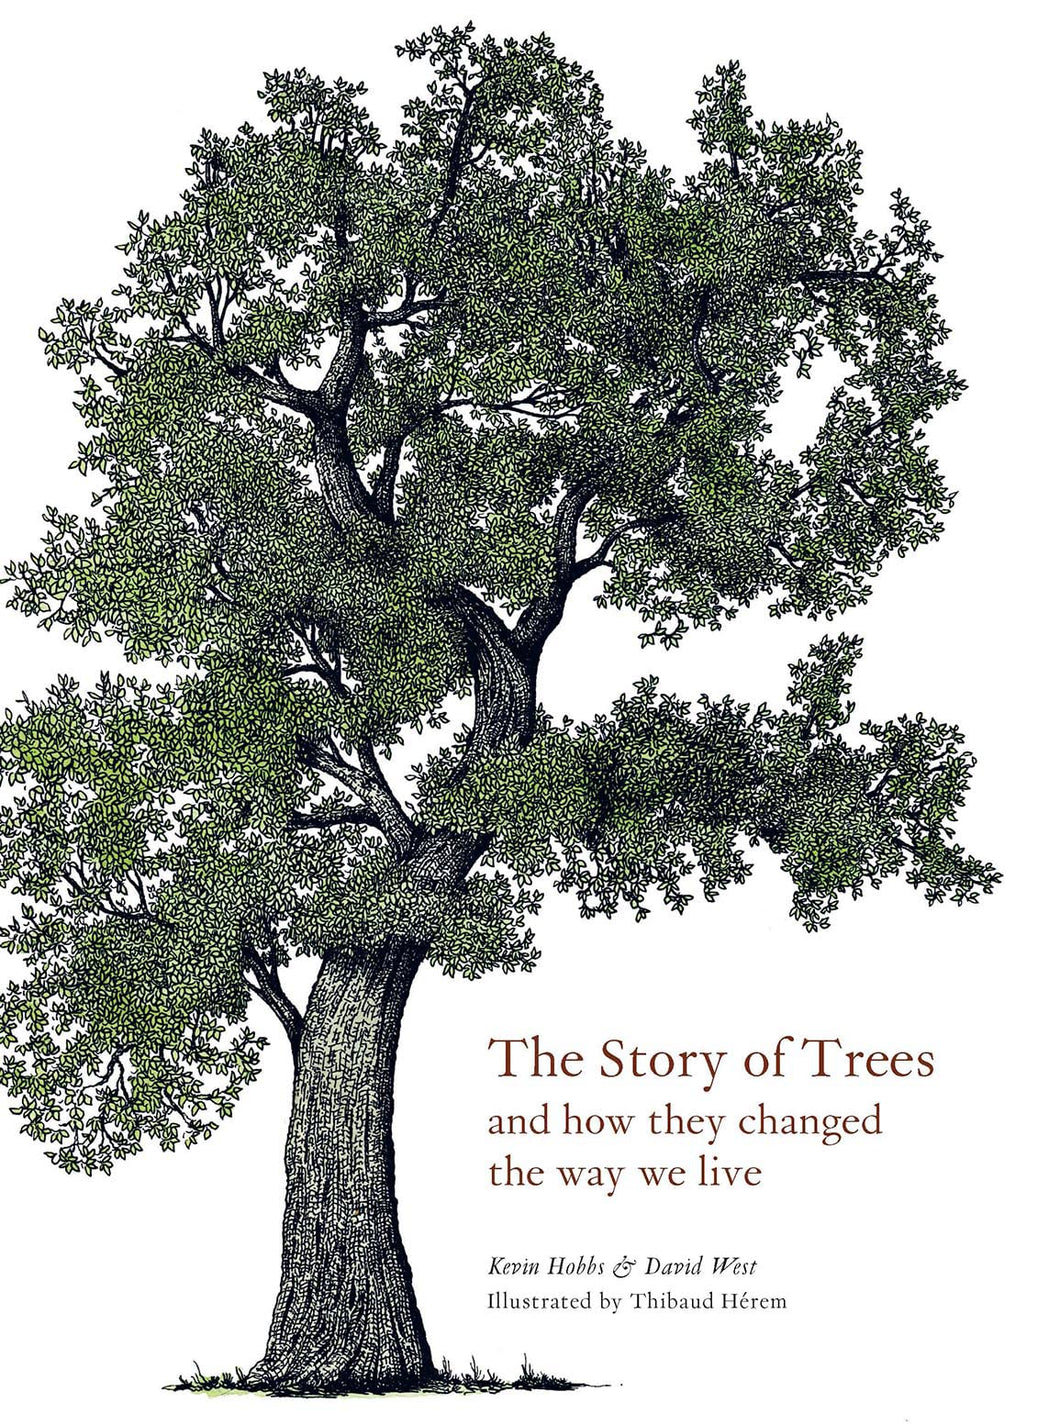 The Story of Trees: And How They Changed the Way We Live